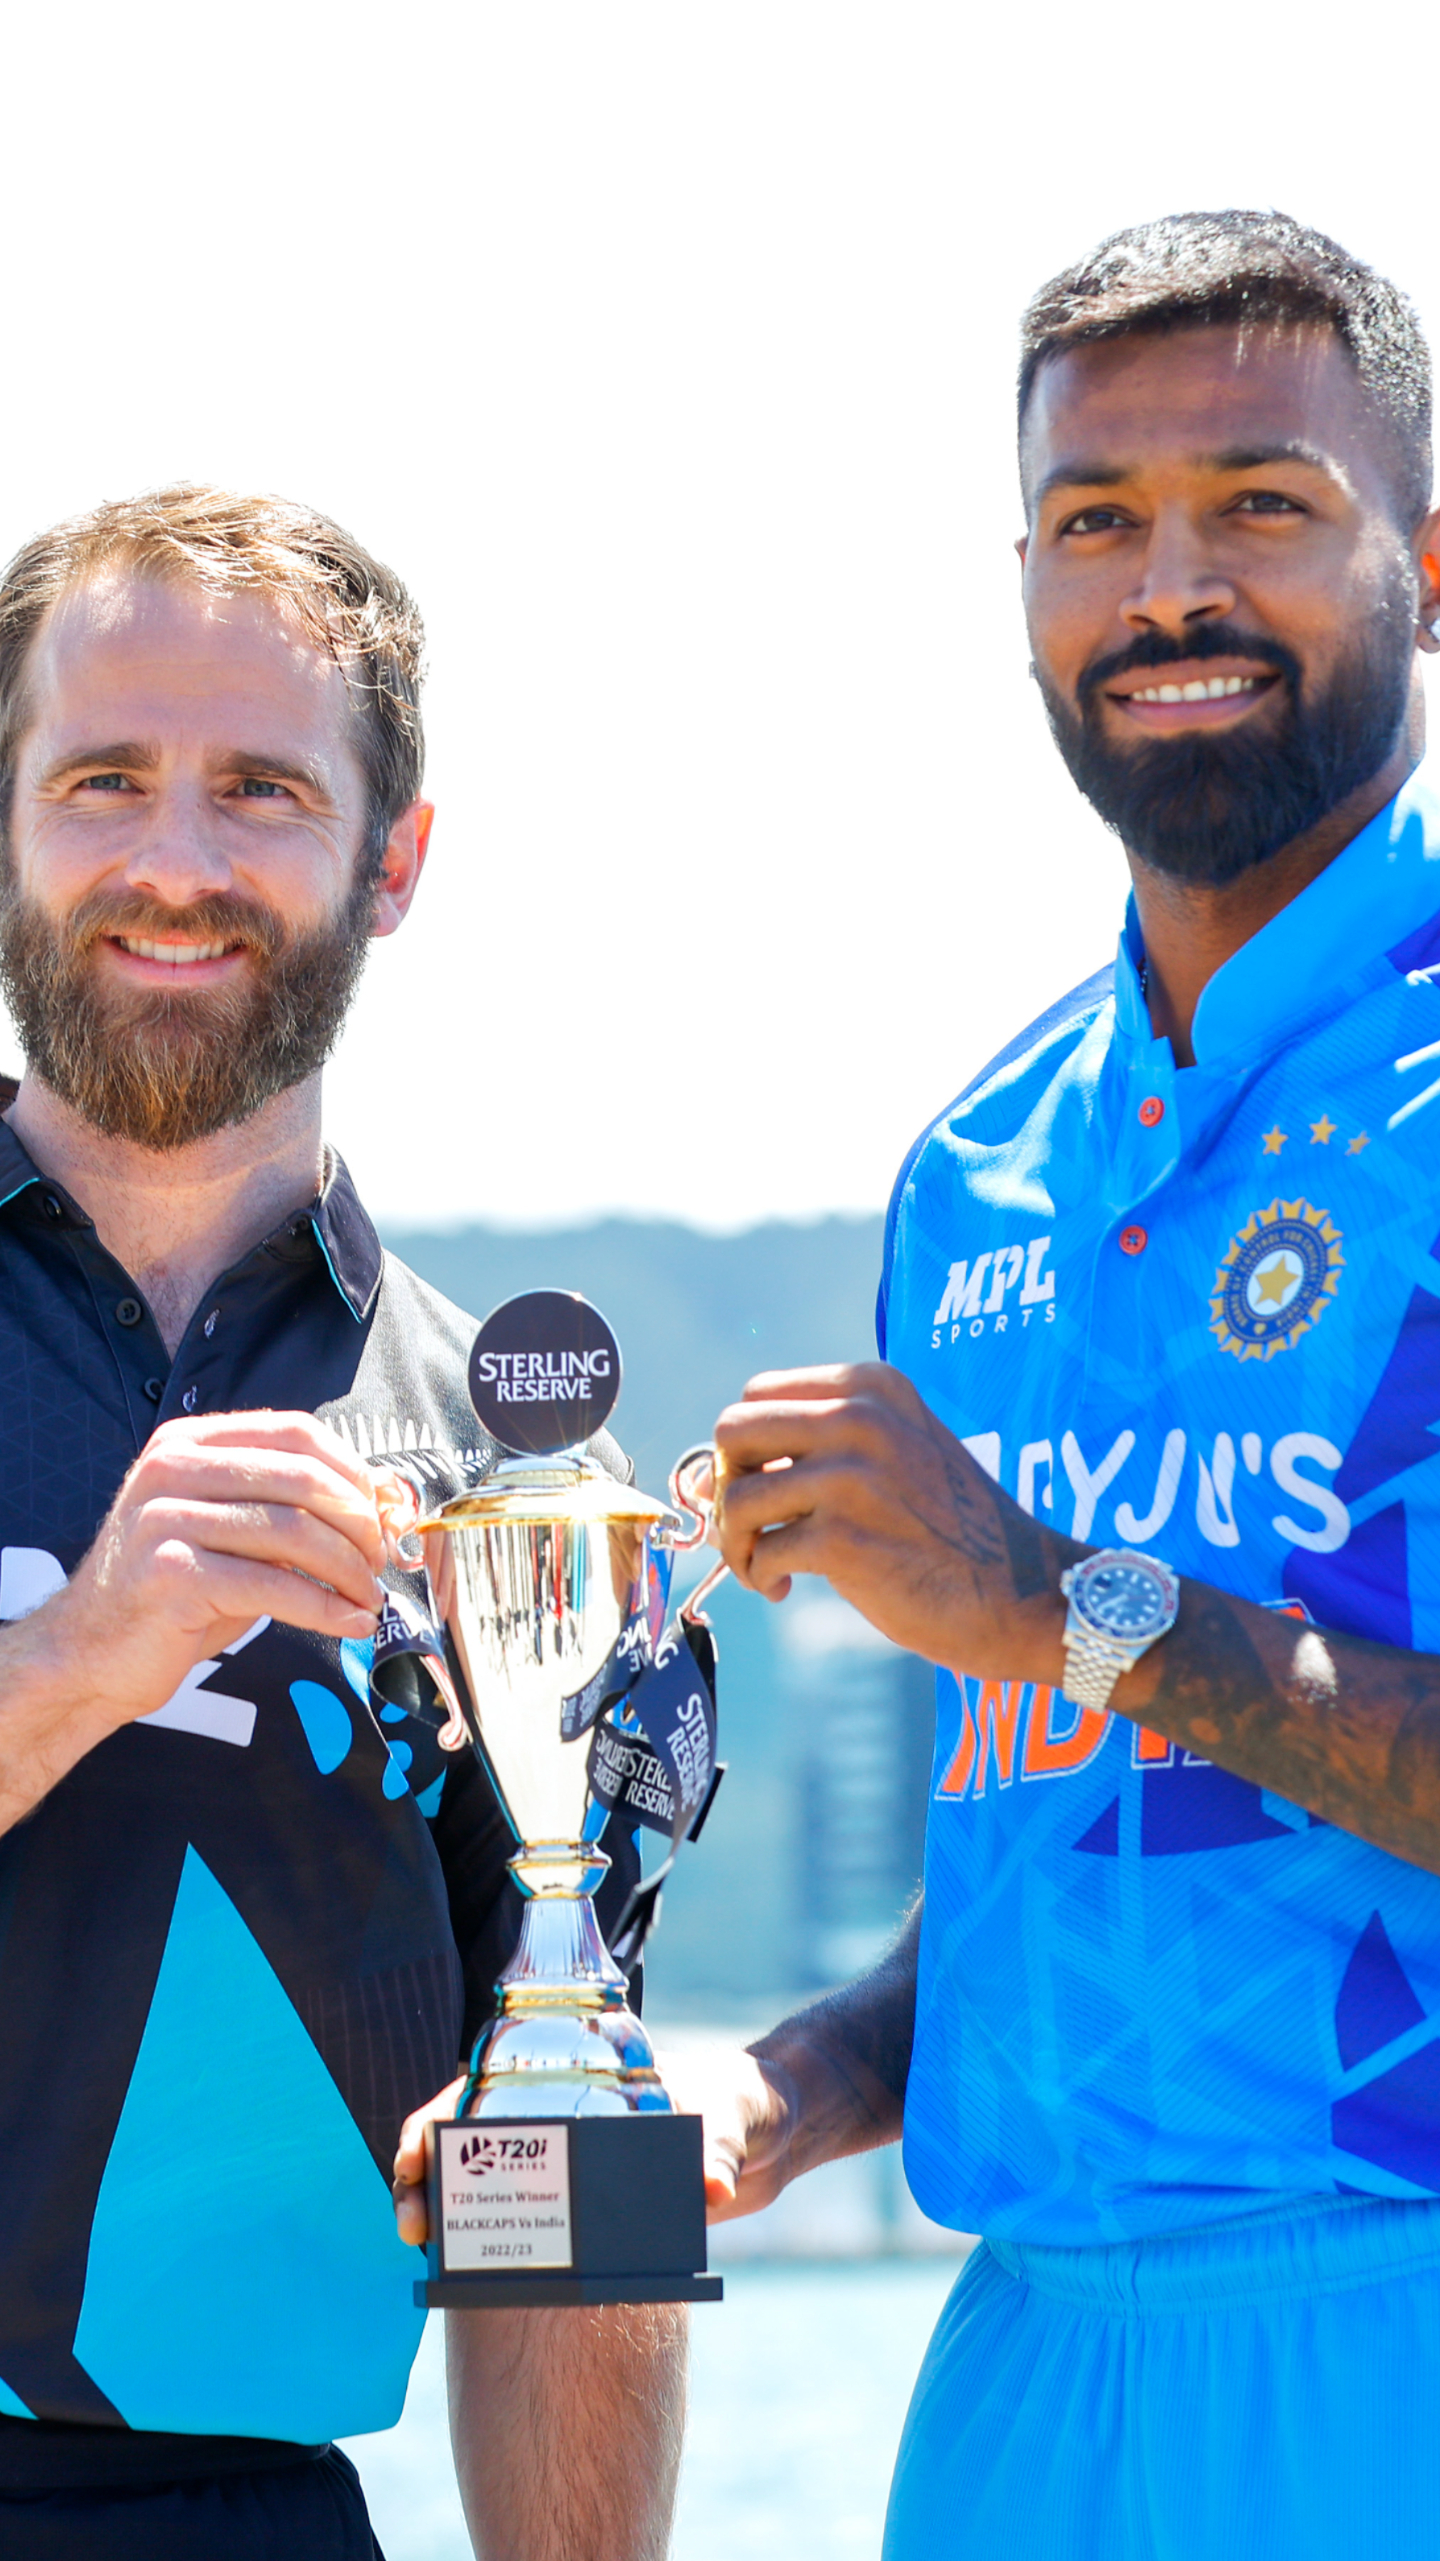 IND vs NZ T20I series: List of highest totals in Bay Oval, Mount Maunganui as India set to face New Zealand